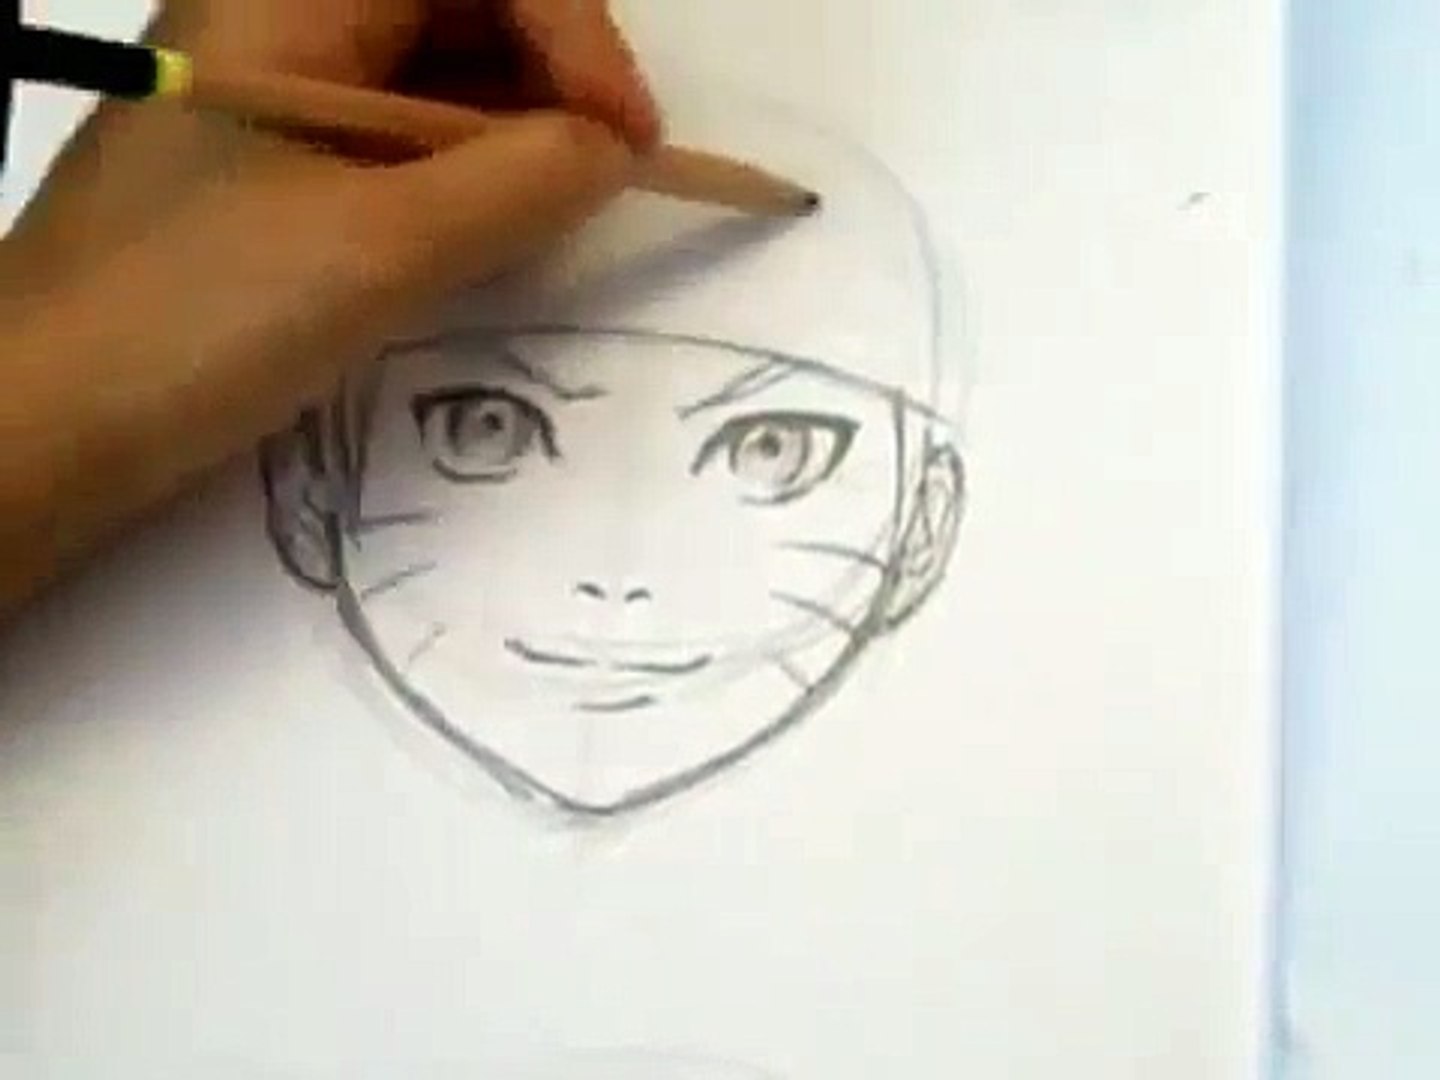 How To Draw Naruto Uzumaki In A Step-By-Step Pencil Drawing Lesson